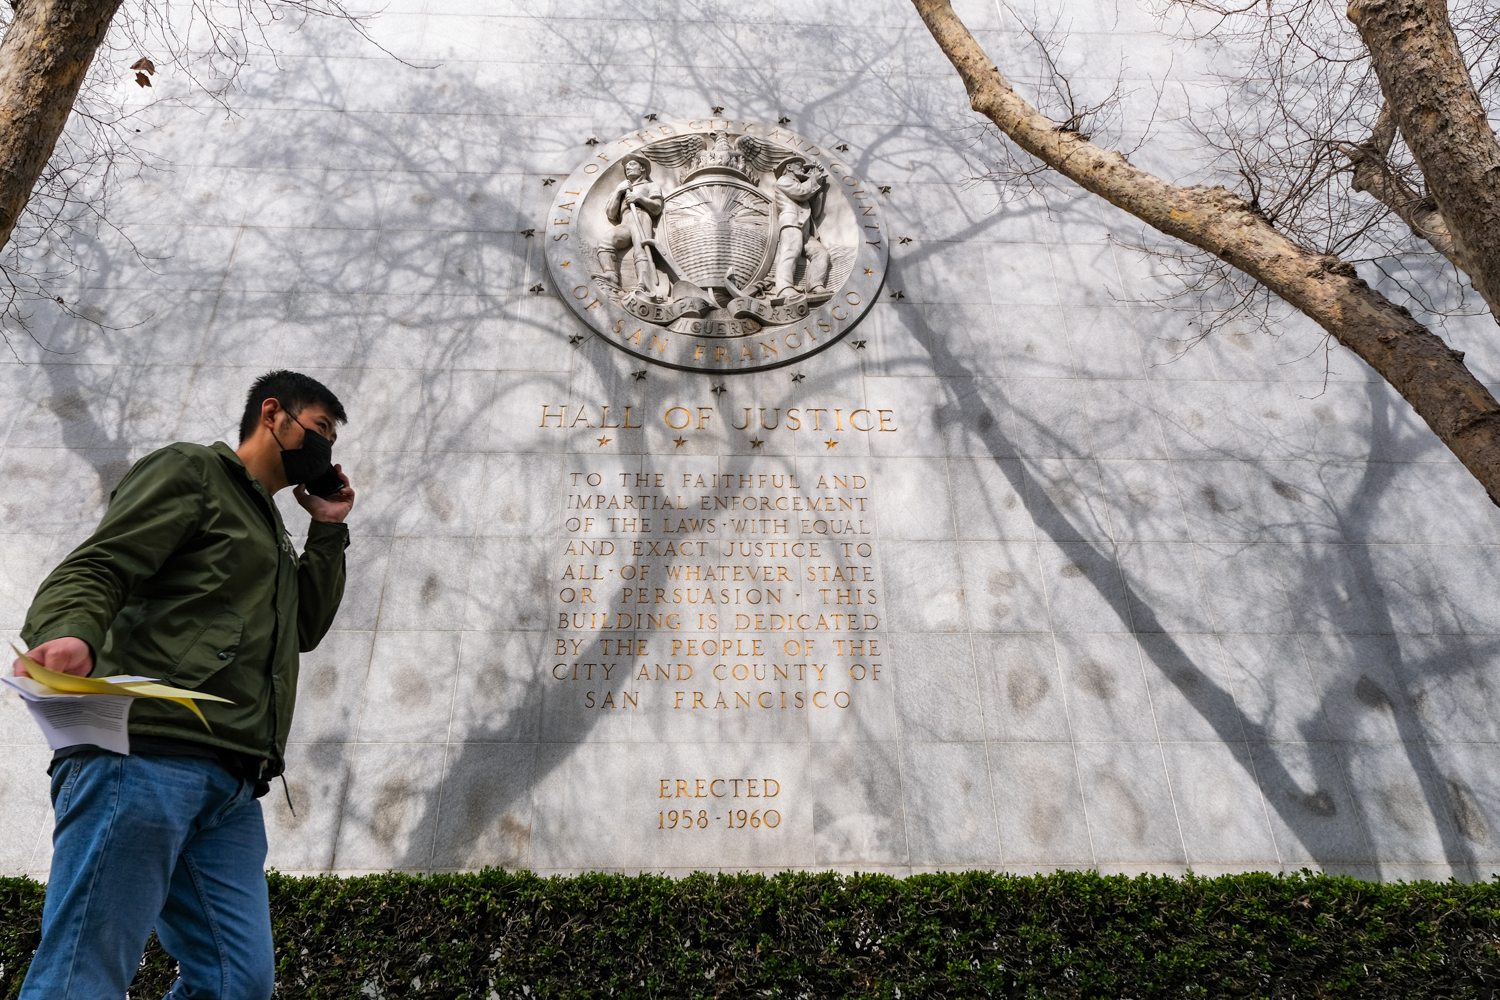 A man walks by a wall with an inscribed seal marked "Hall of Justice" and text on dedication by San Francisco's people.